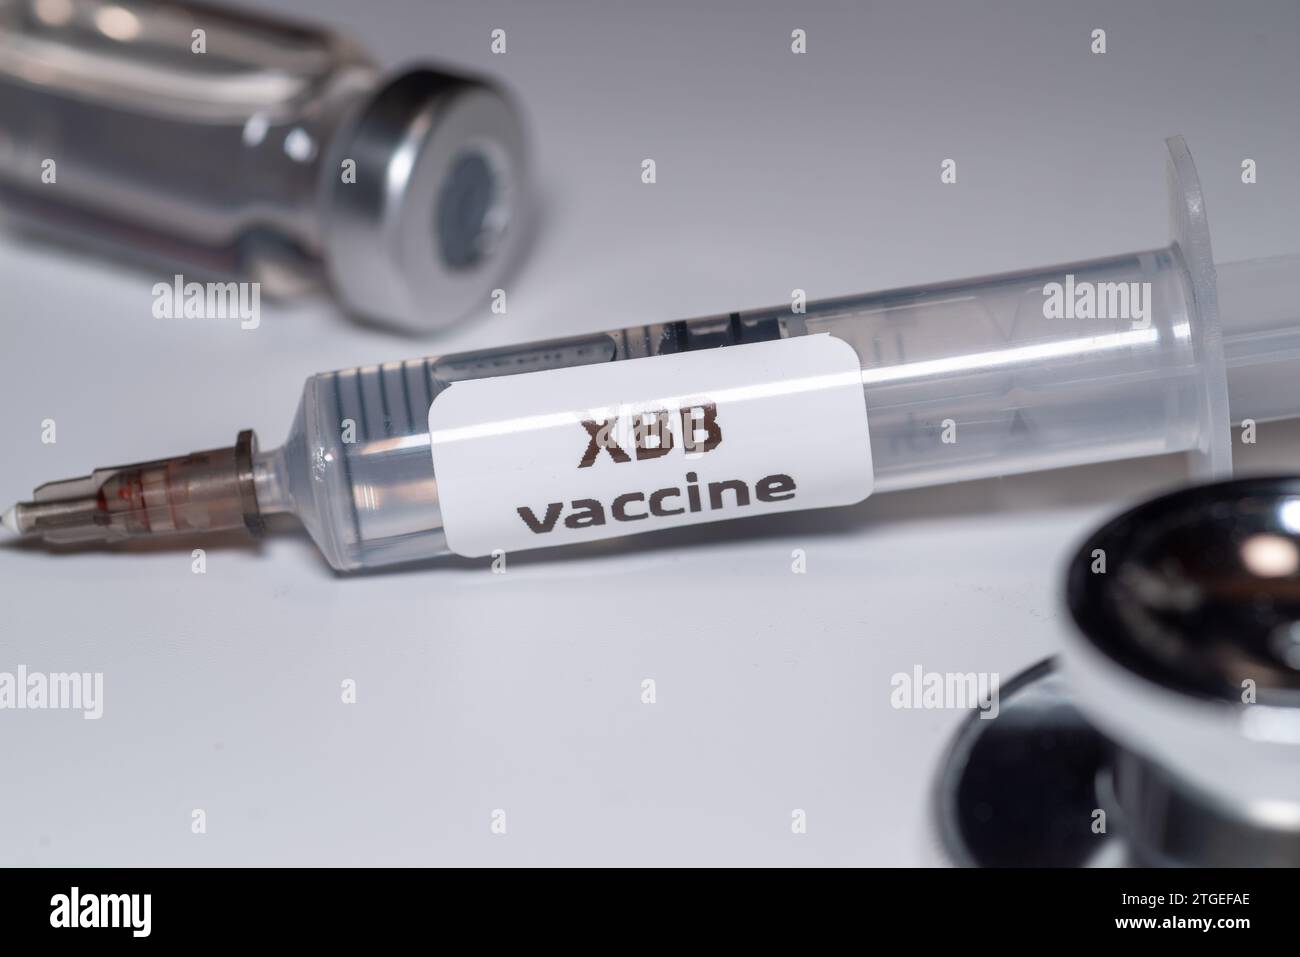 Close up of XBB vaccine vial,Medical health concept Stock Photo